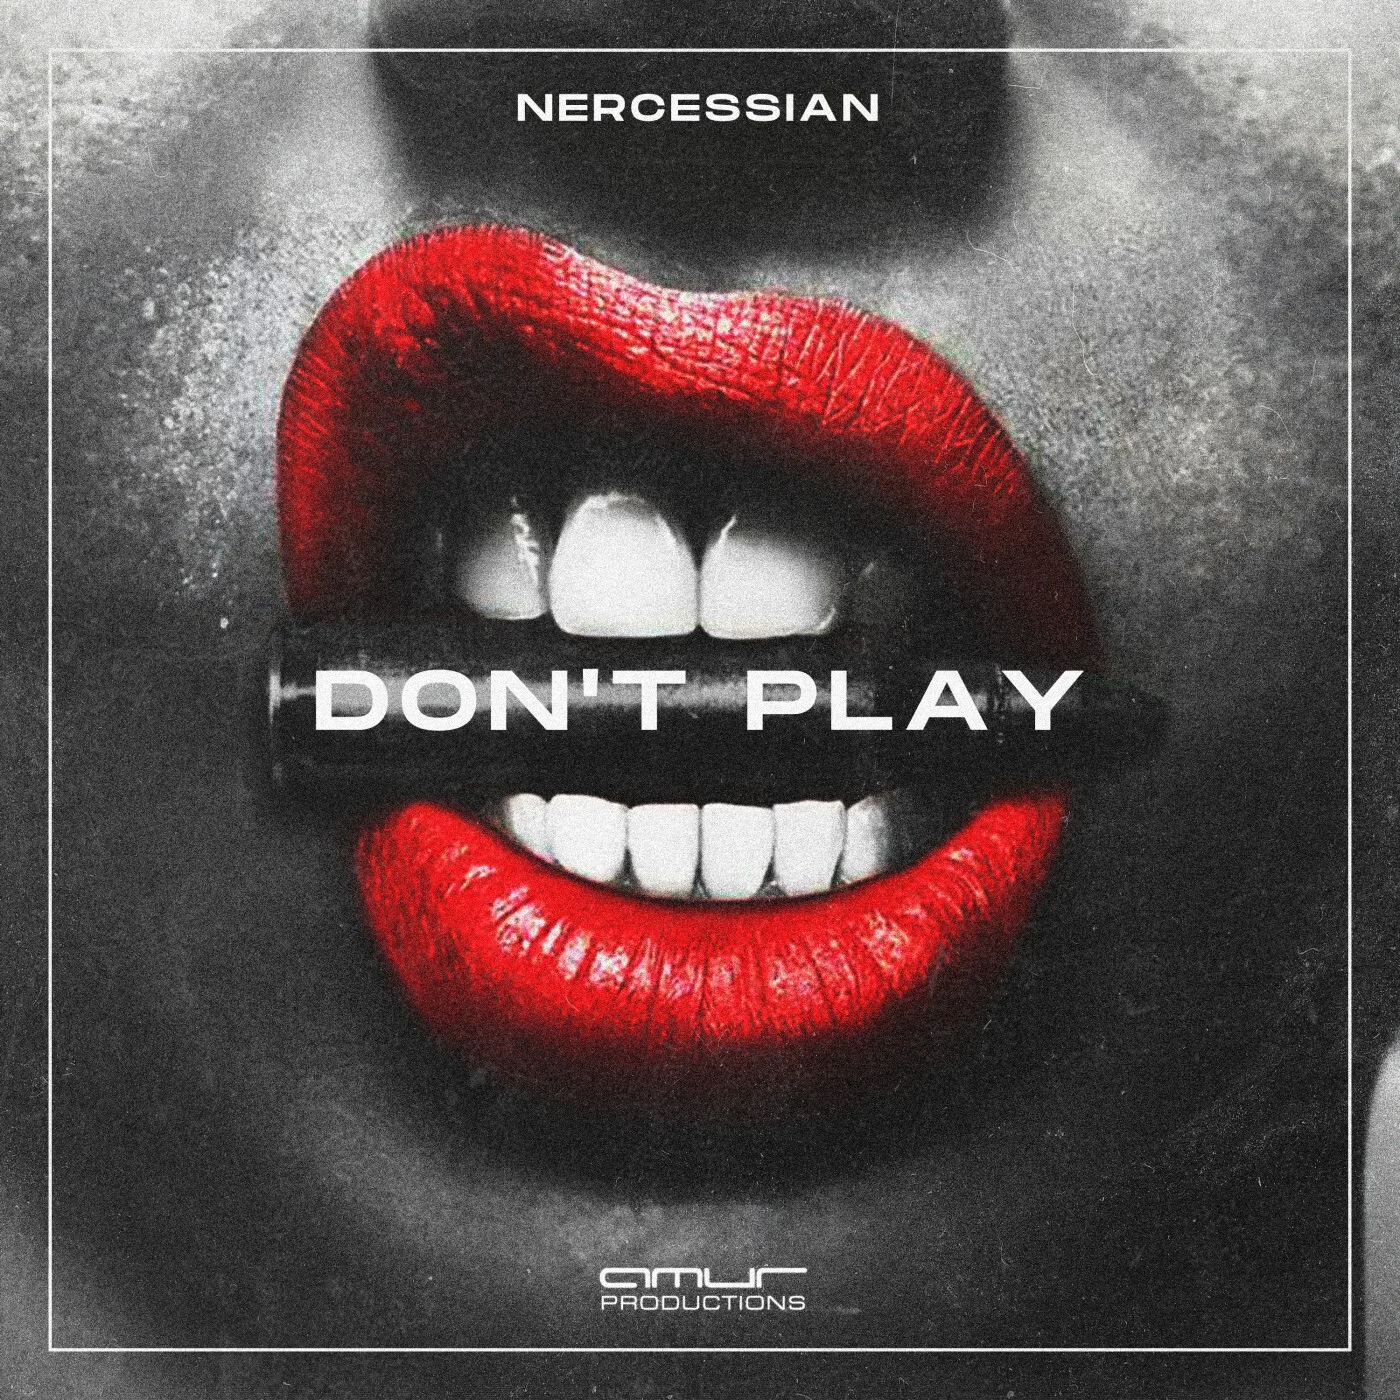 Nercessian's latest single "Don’t Play" is set to dominate dancefloors and playlists alike